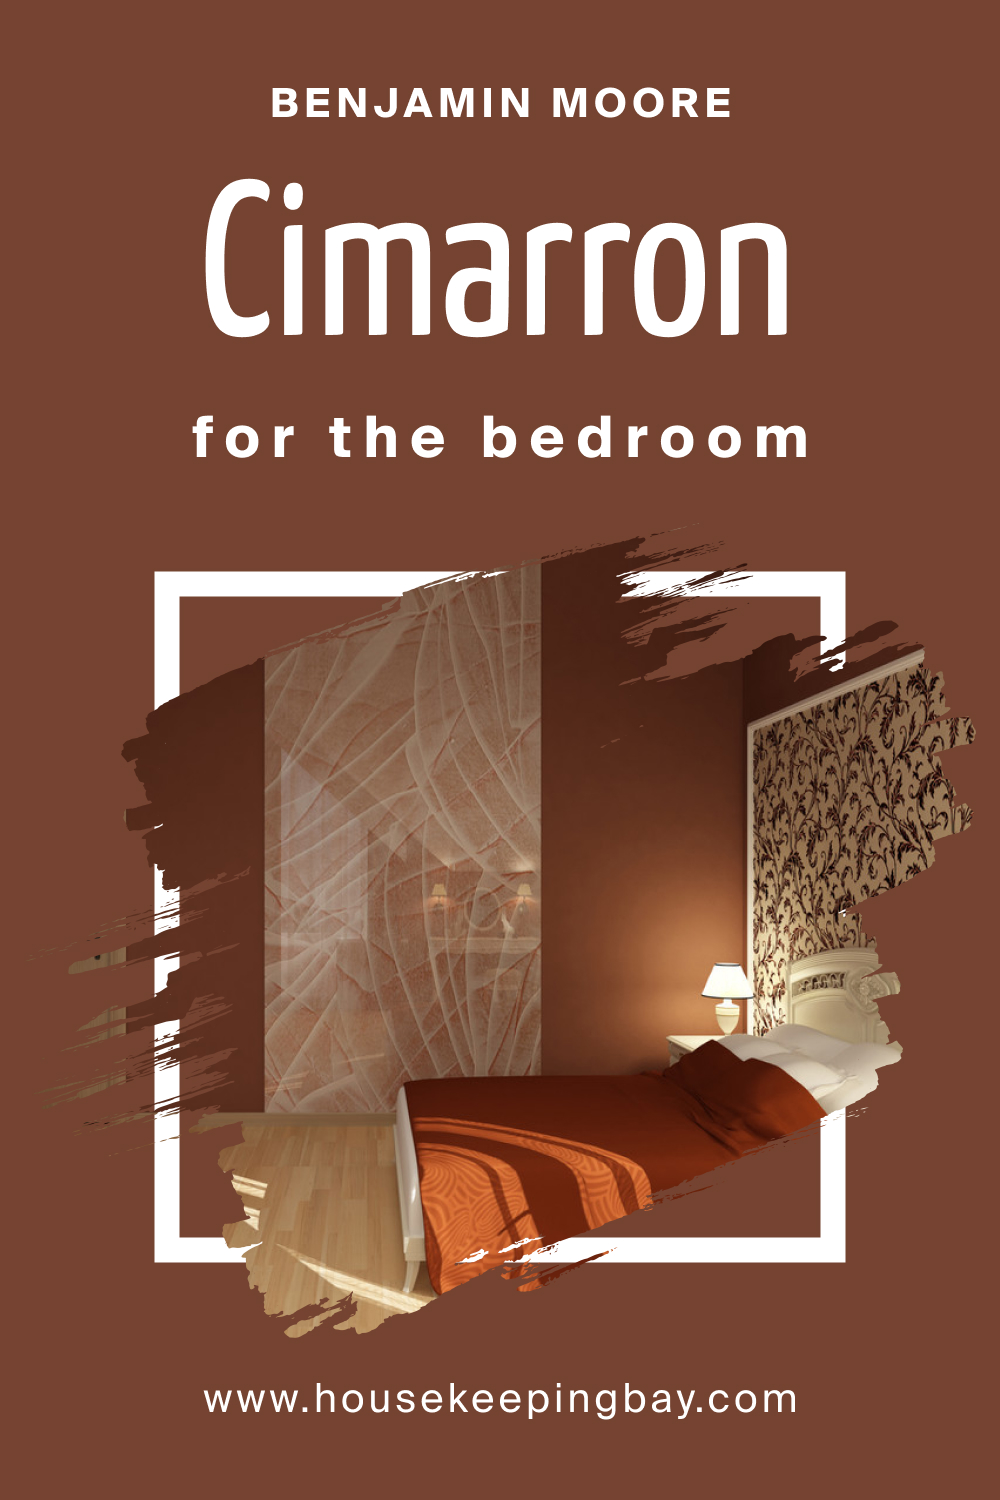 How to Use BM Cimarron 2093-10 in the Bedroom?